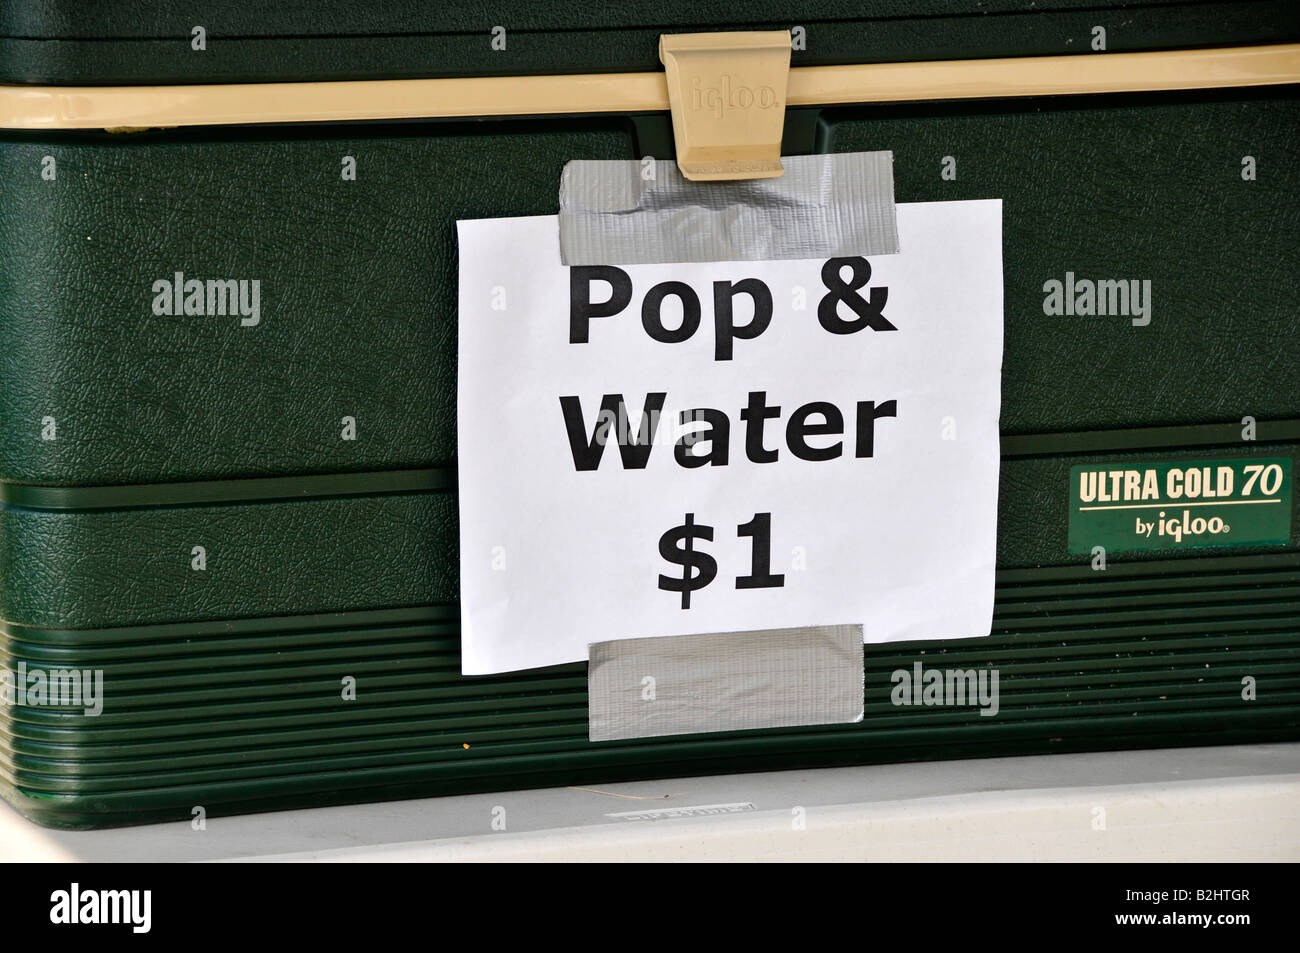 Pop and water for 1 dollar on the side of a cooler Stock Photo